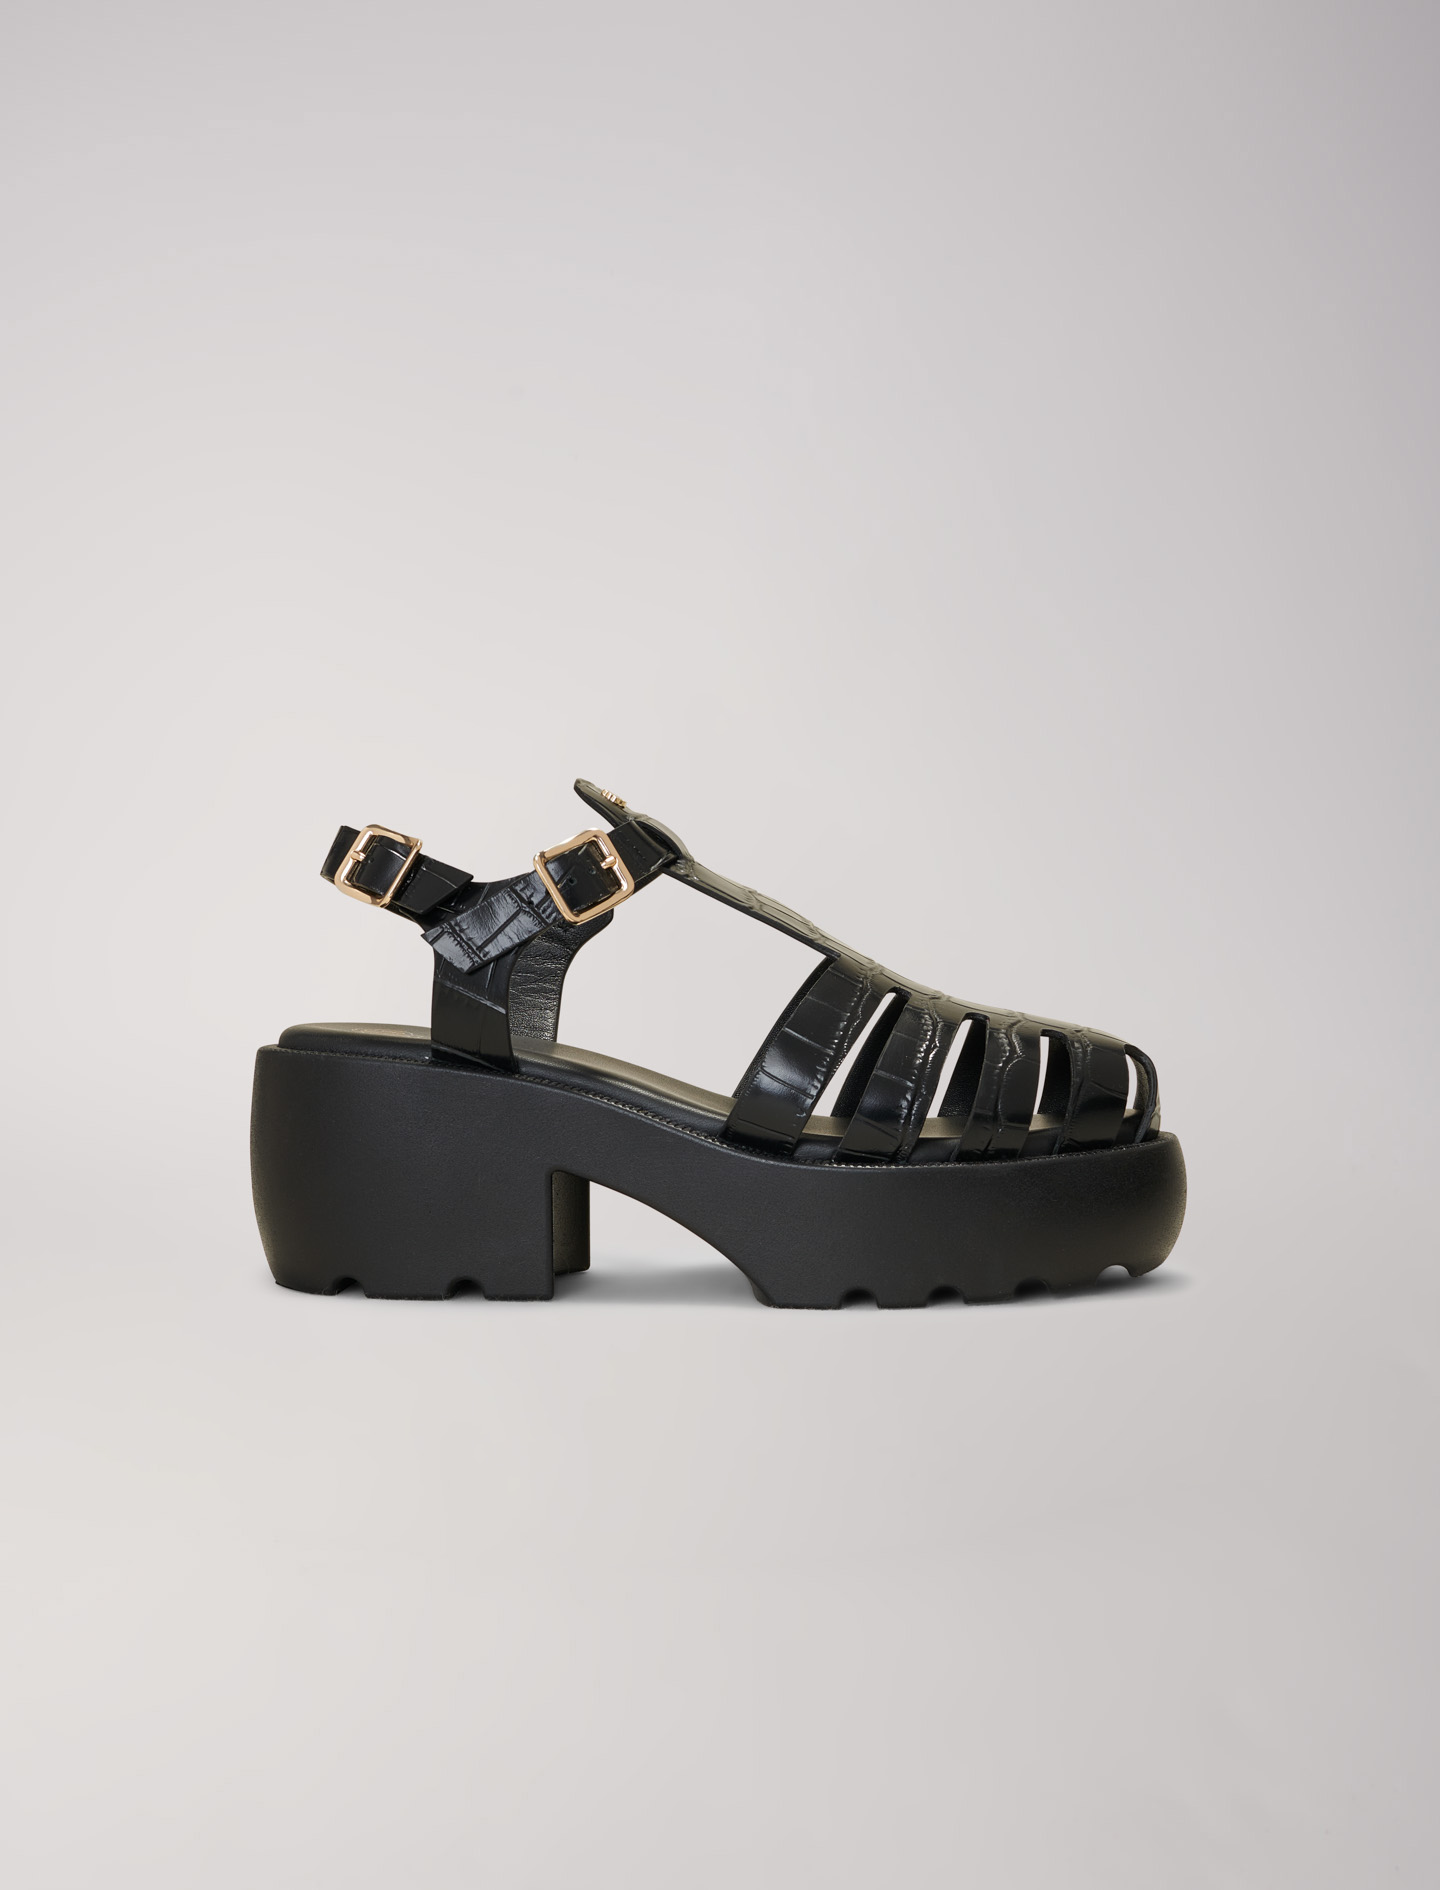 Maje Woman's polyester, Leather sandals with tread for Spring/Summer, in color Black / Black